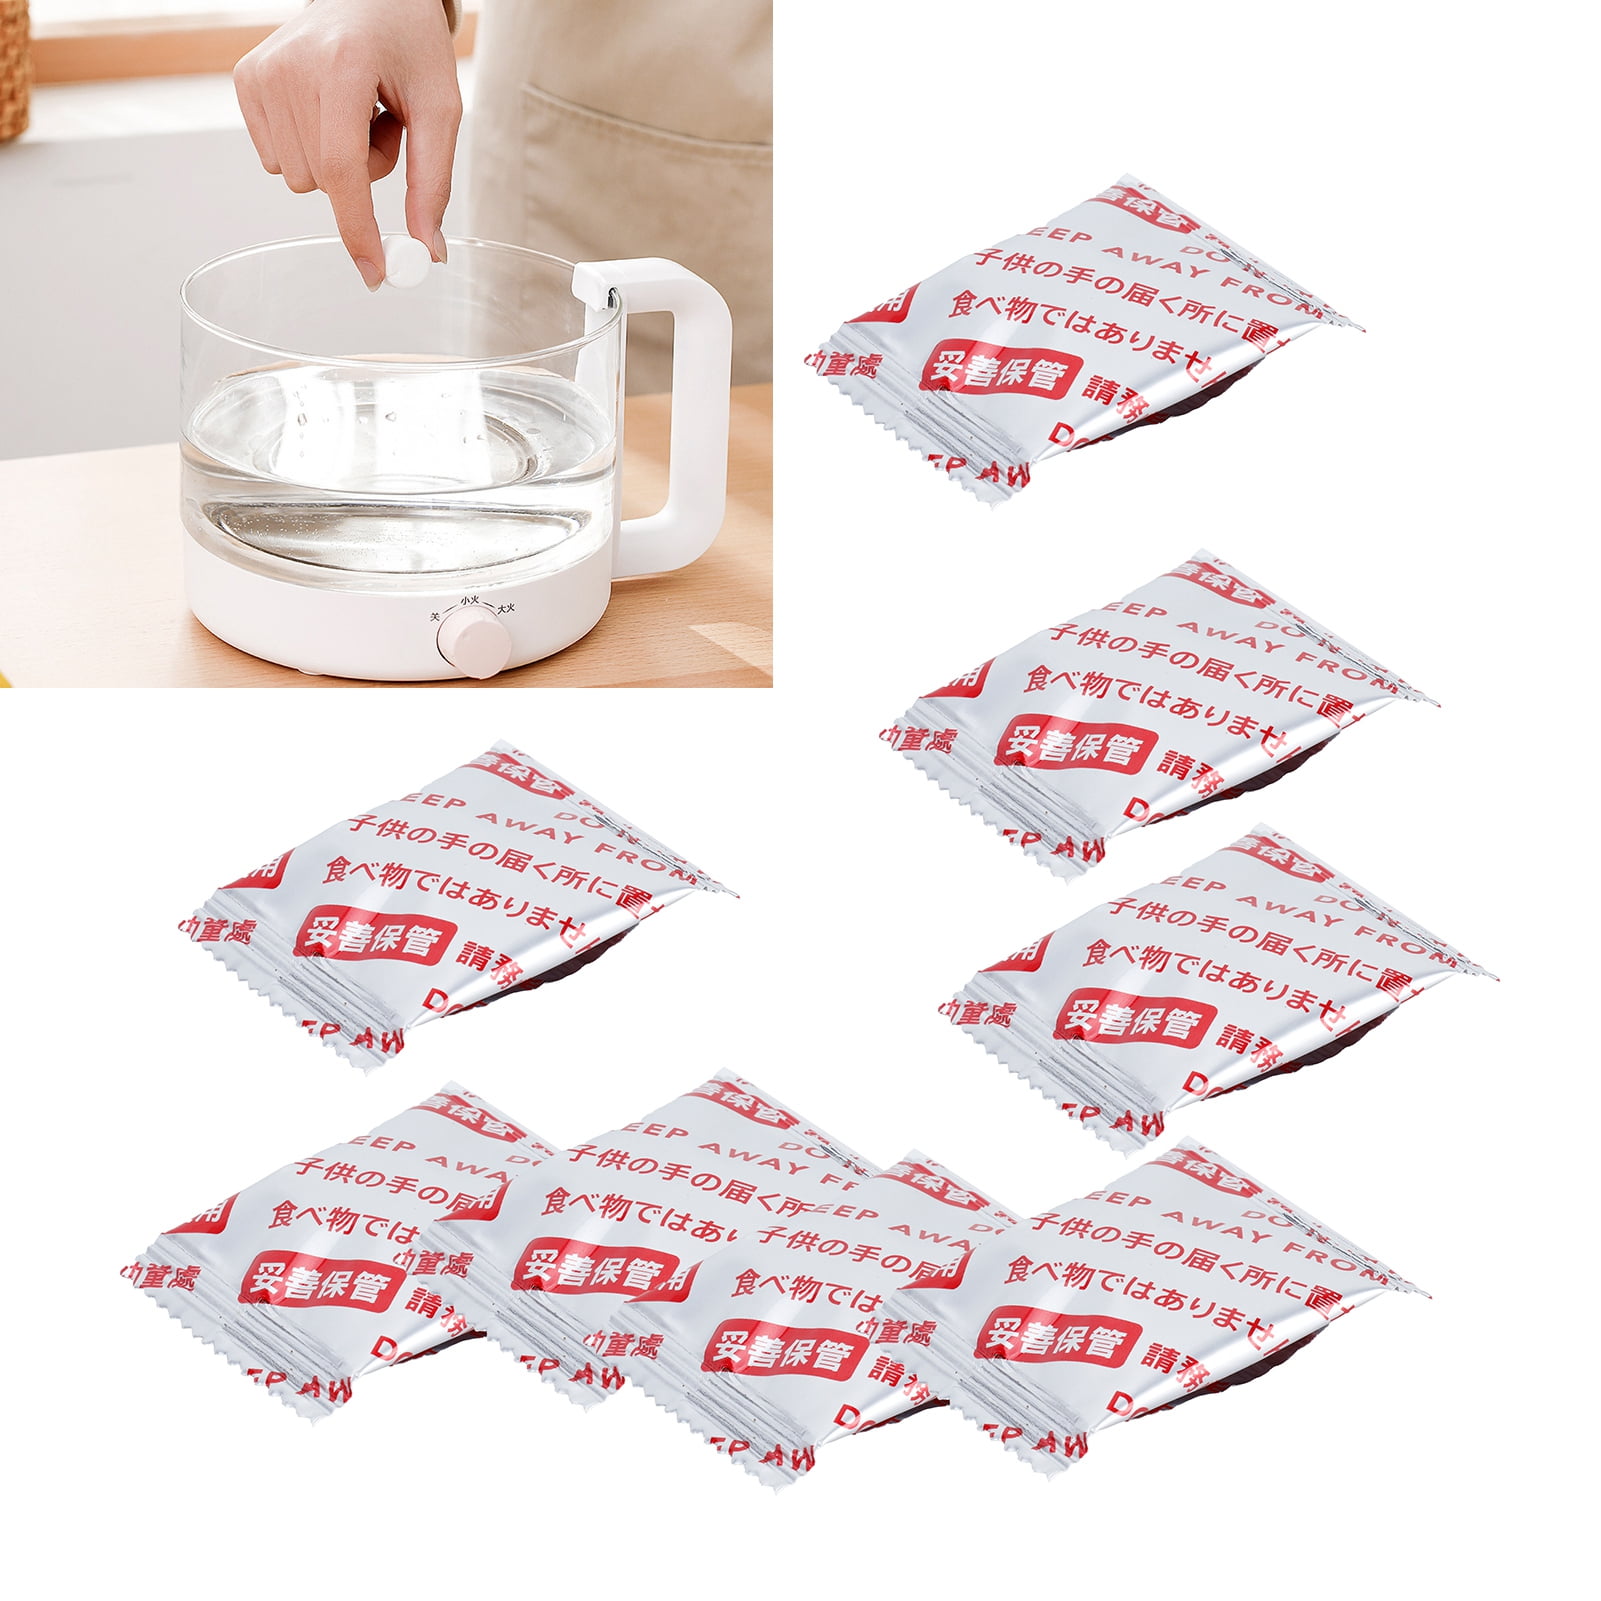 8x Descaling Tablets Scale Cleaning Tablets For Electric Kettle Water Dispenser. 